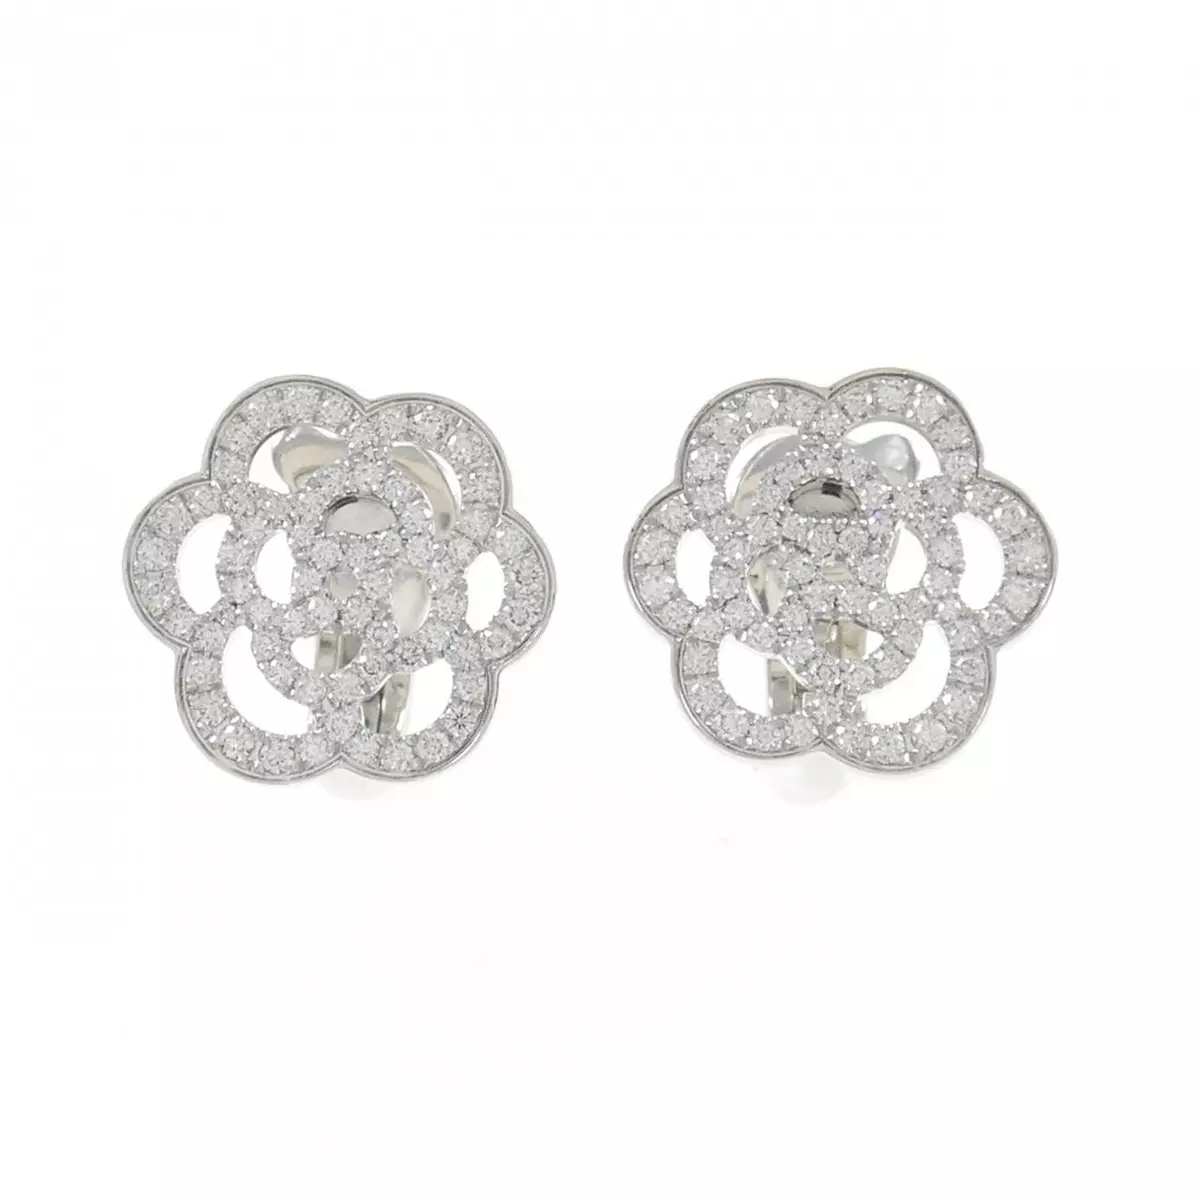 Authentic CHANEL Camelia Earrings #260-005-995-4996